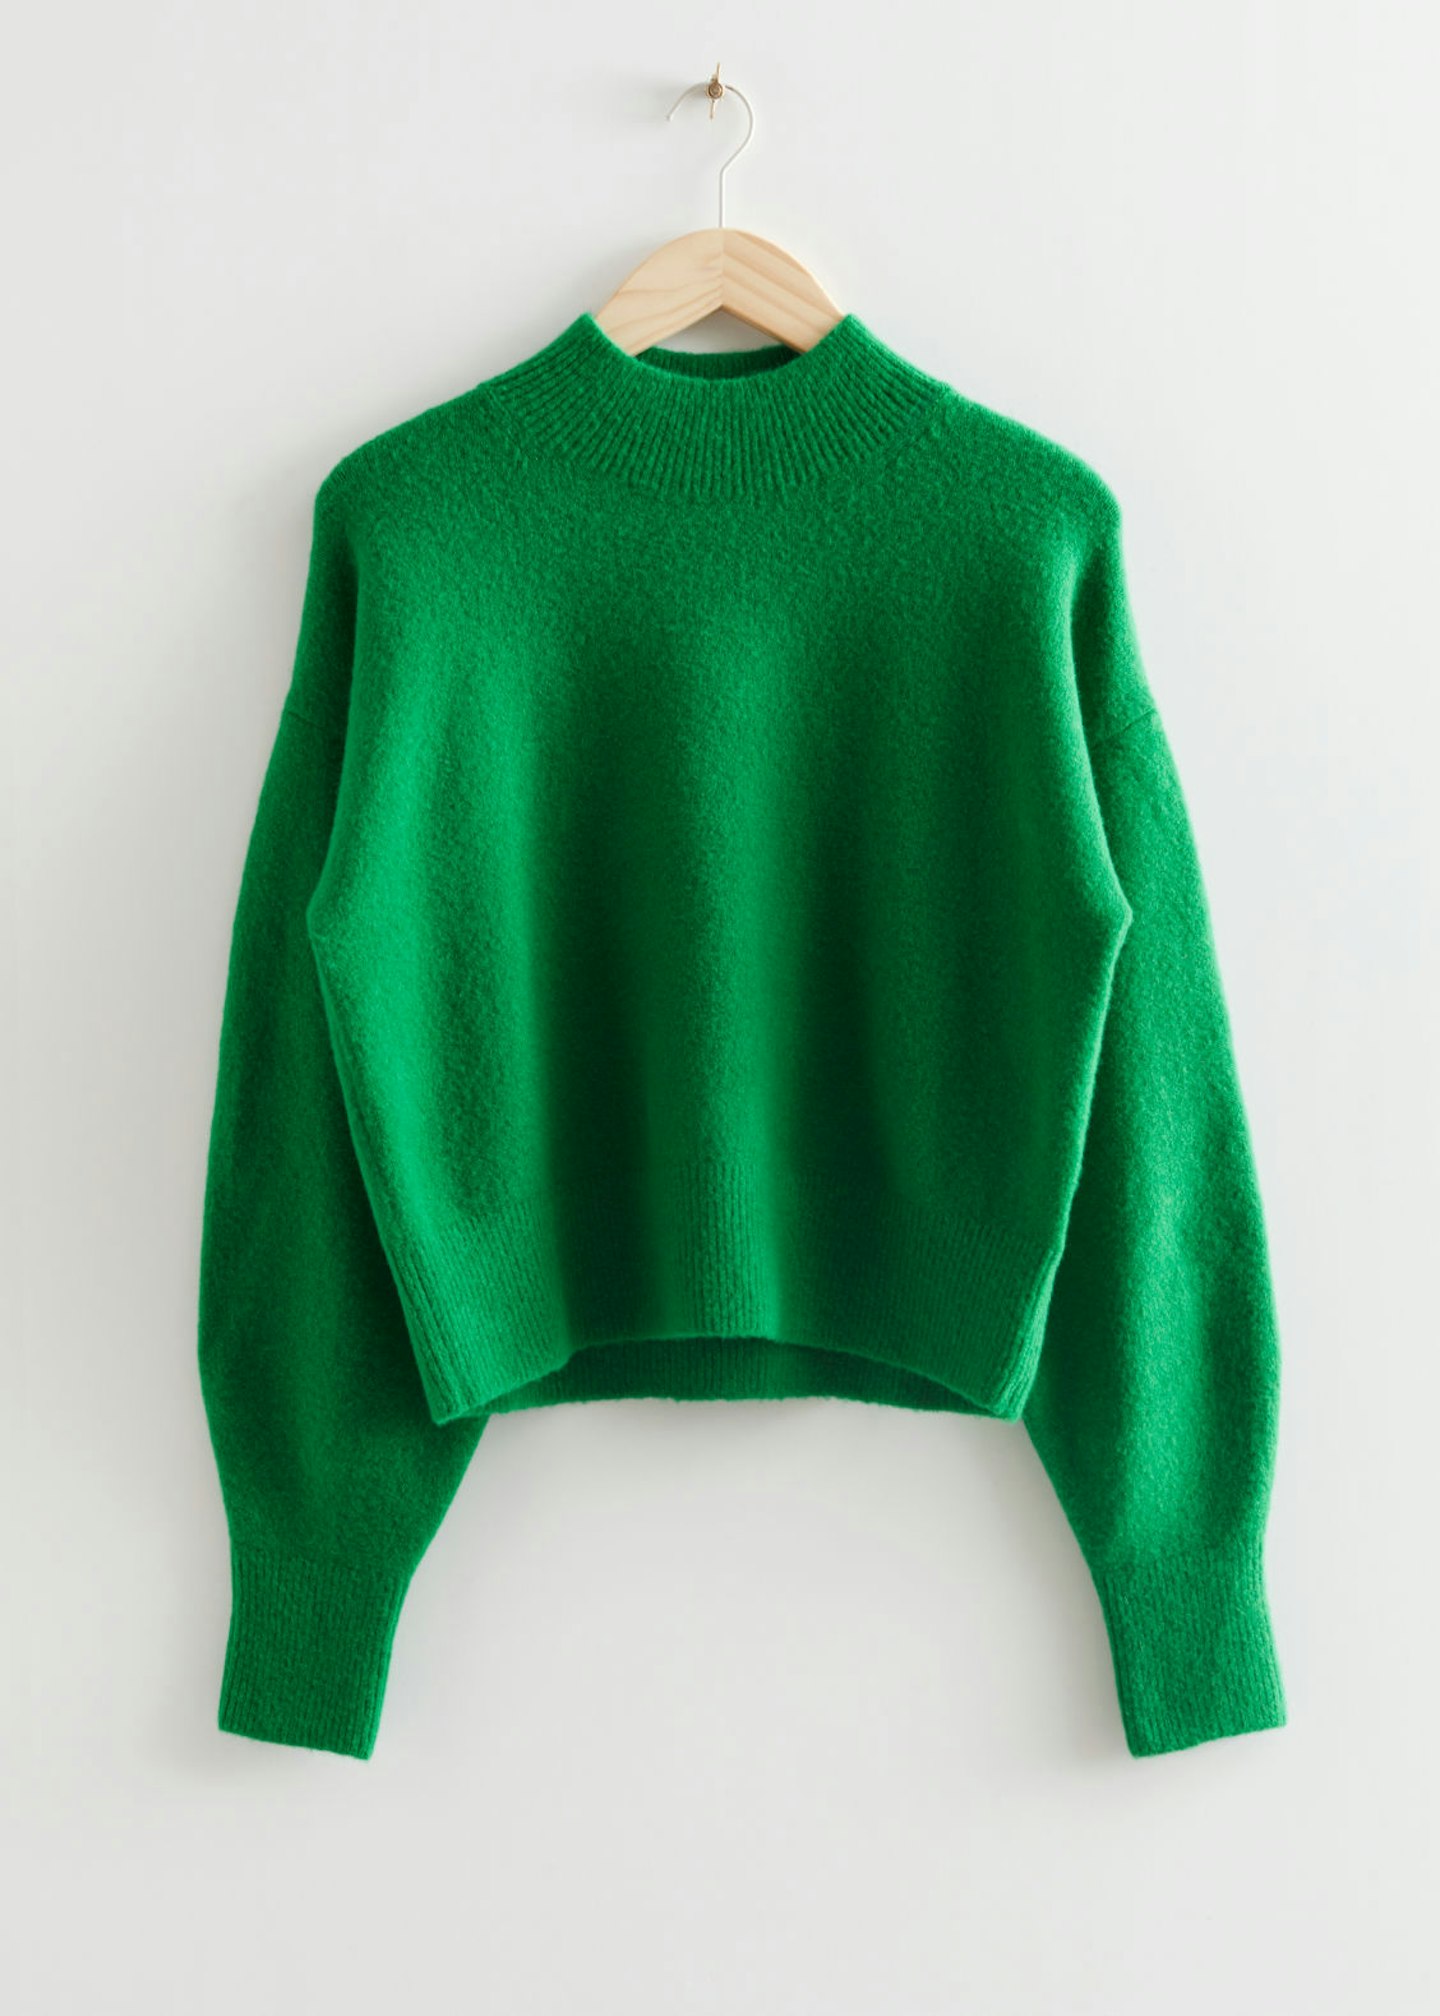 & Other Stories, Mock-Neck Sweater